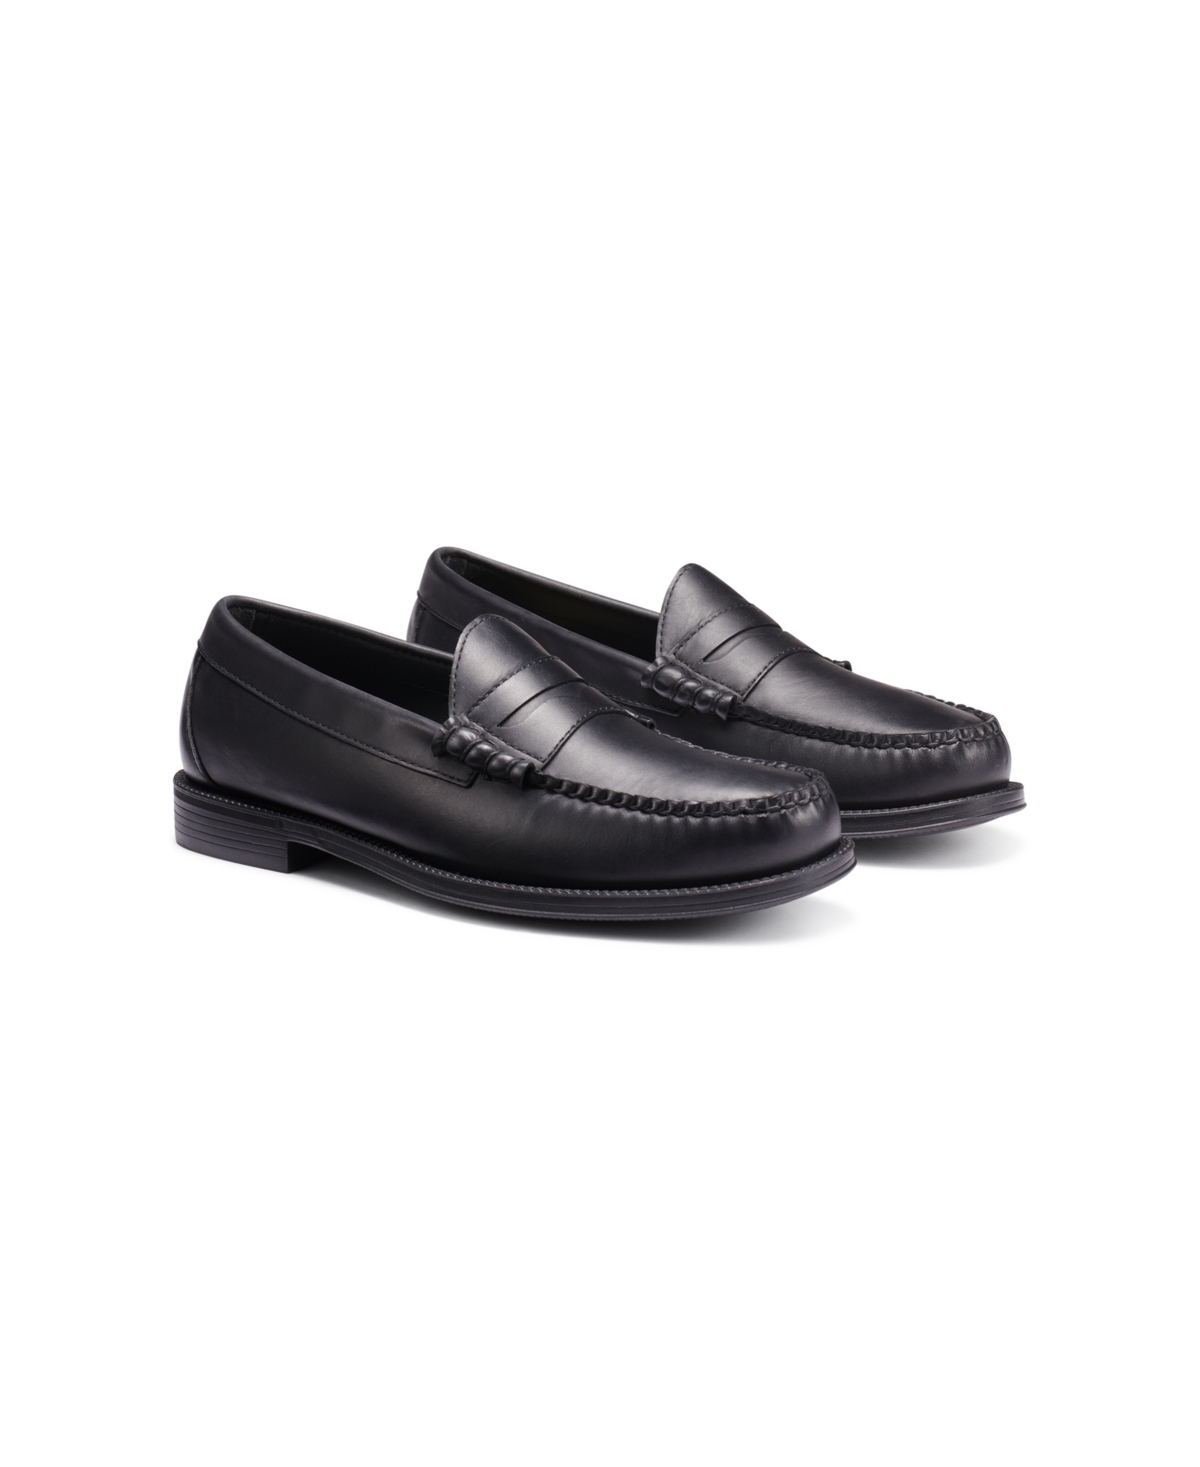 Gh Bass G.h.bass Men's Larson Easy Weejuns Penny Loafers In Black